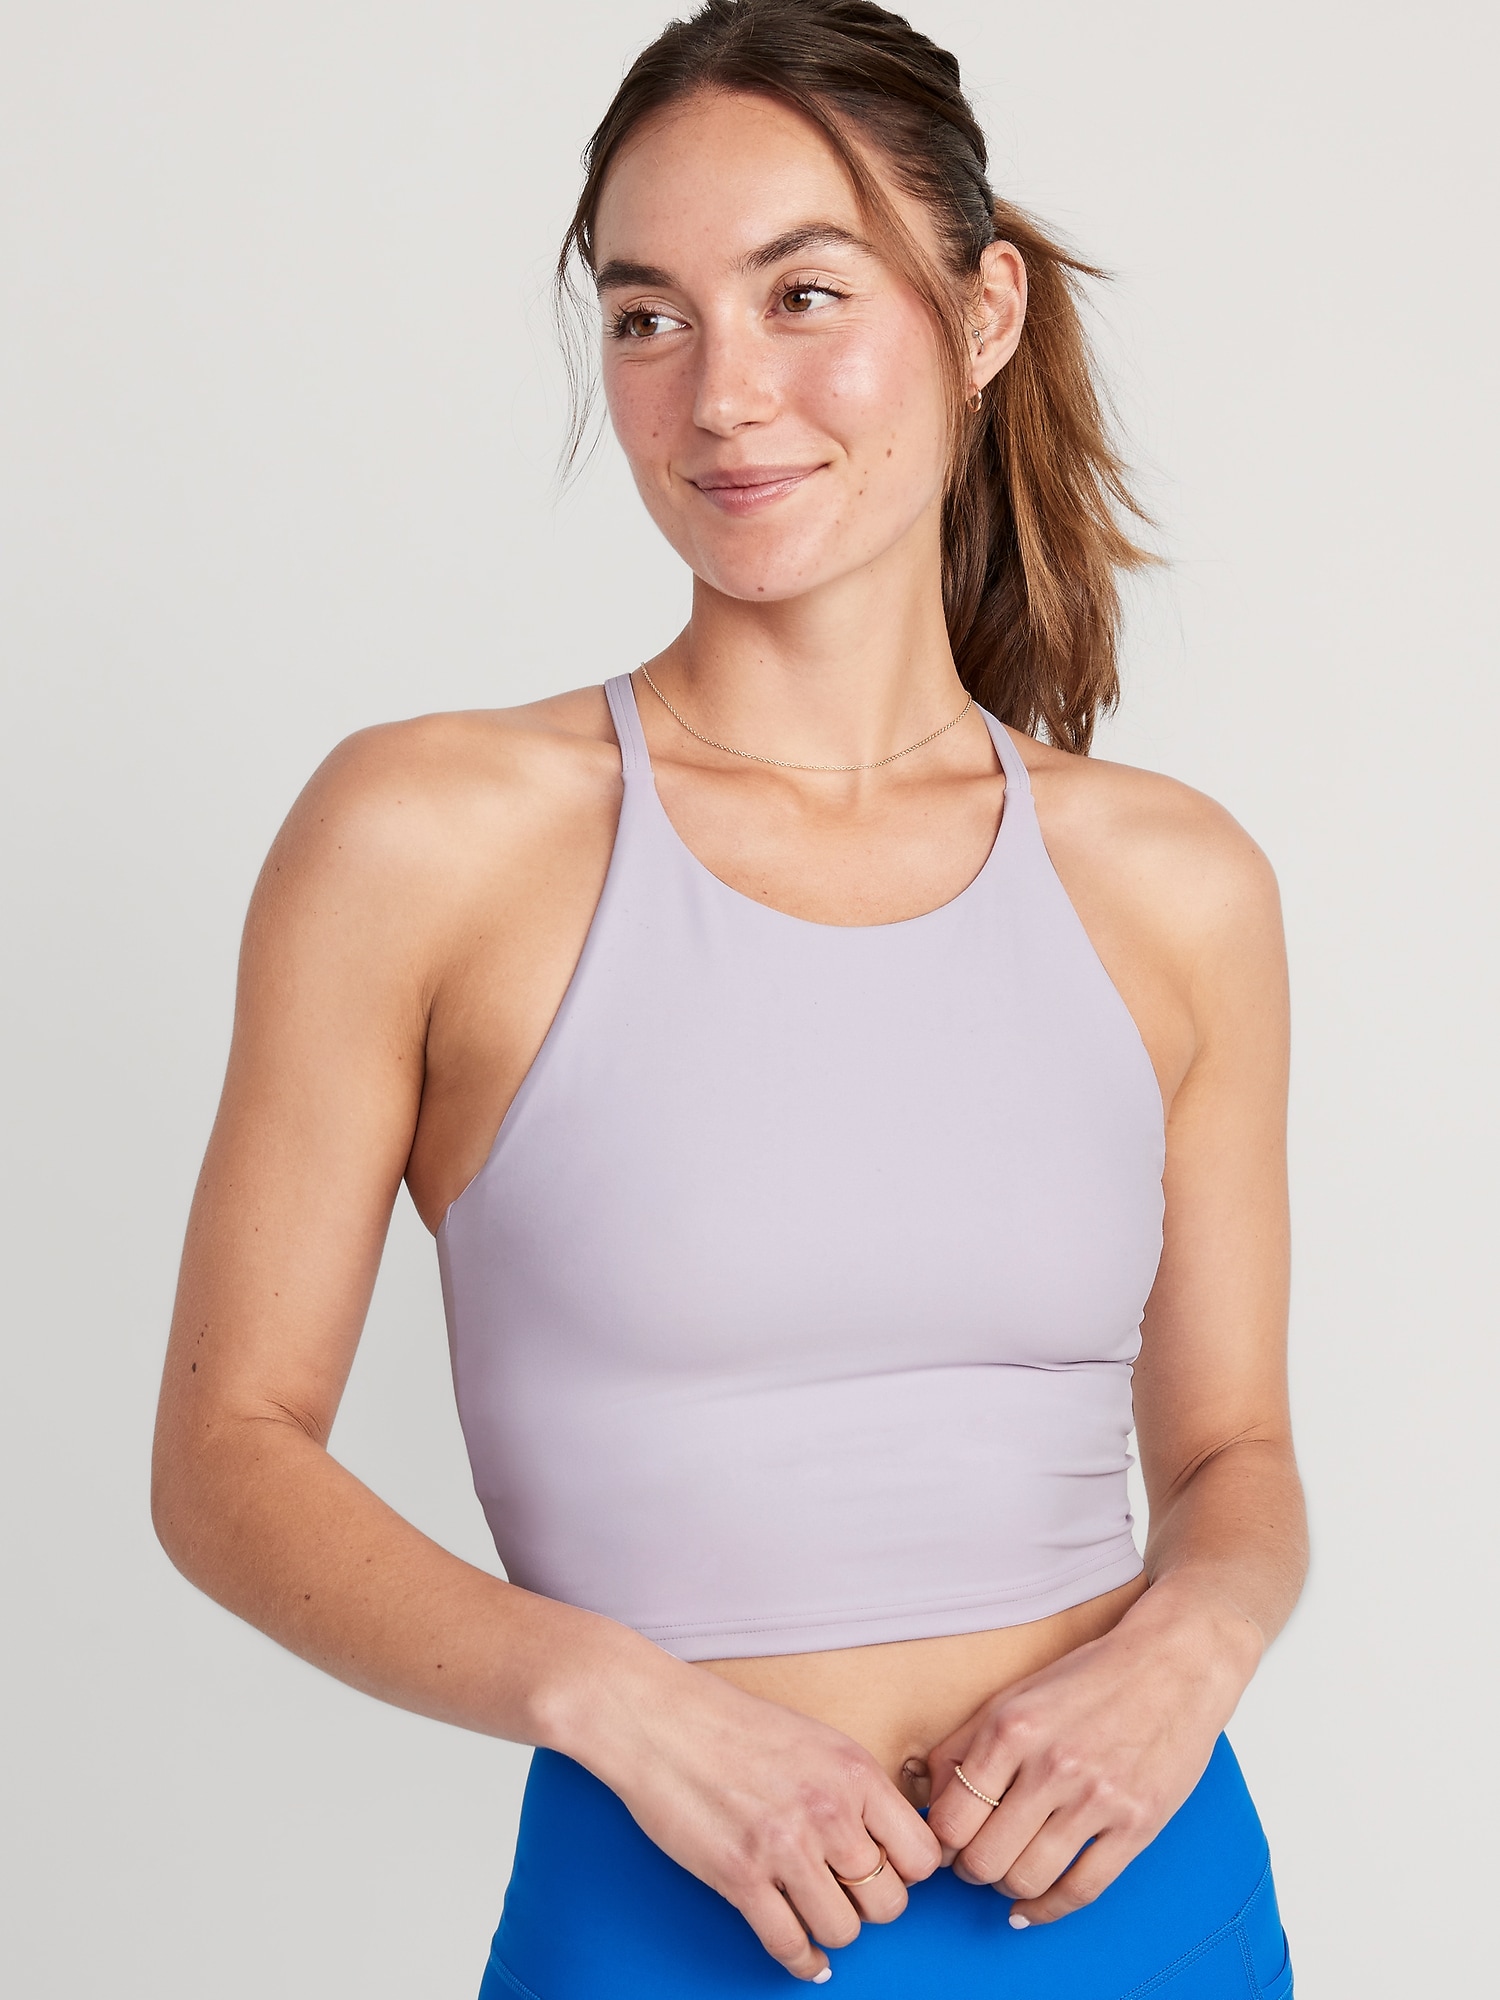 Old Navy PowerSoft Molded Cup Longline Sports Bra for Women